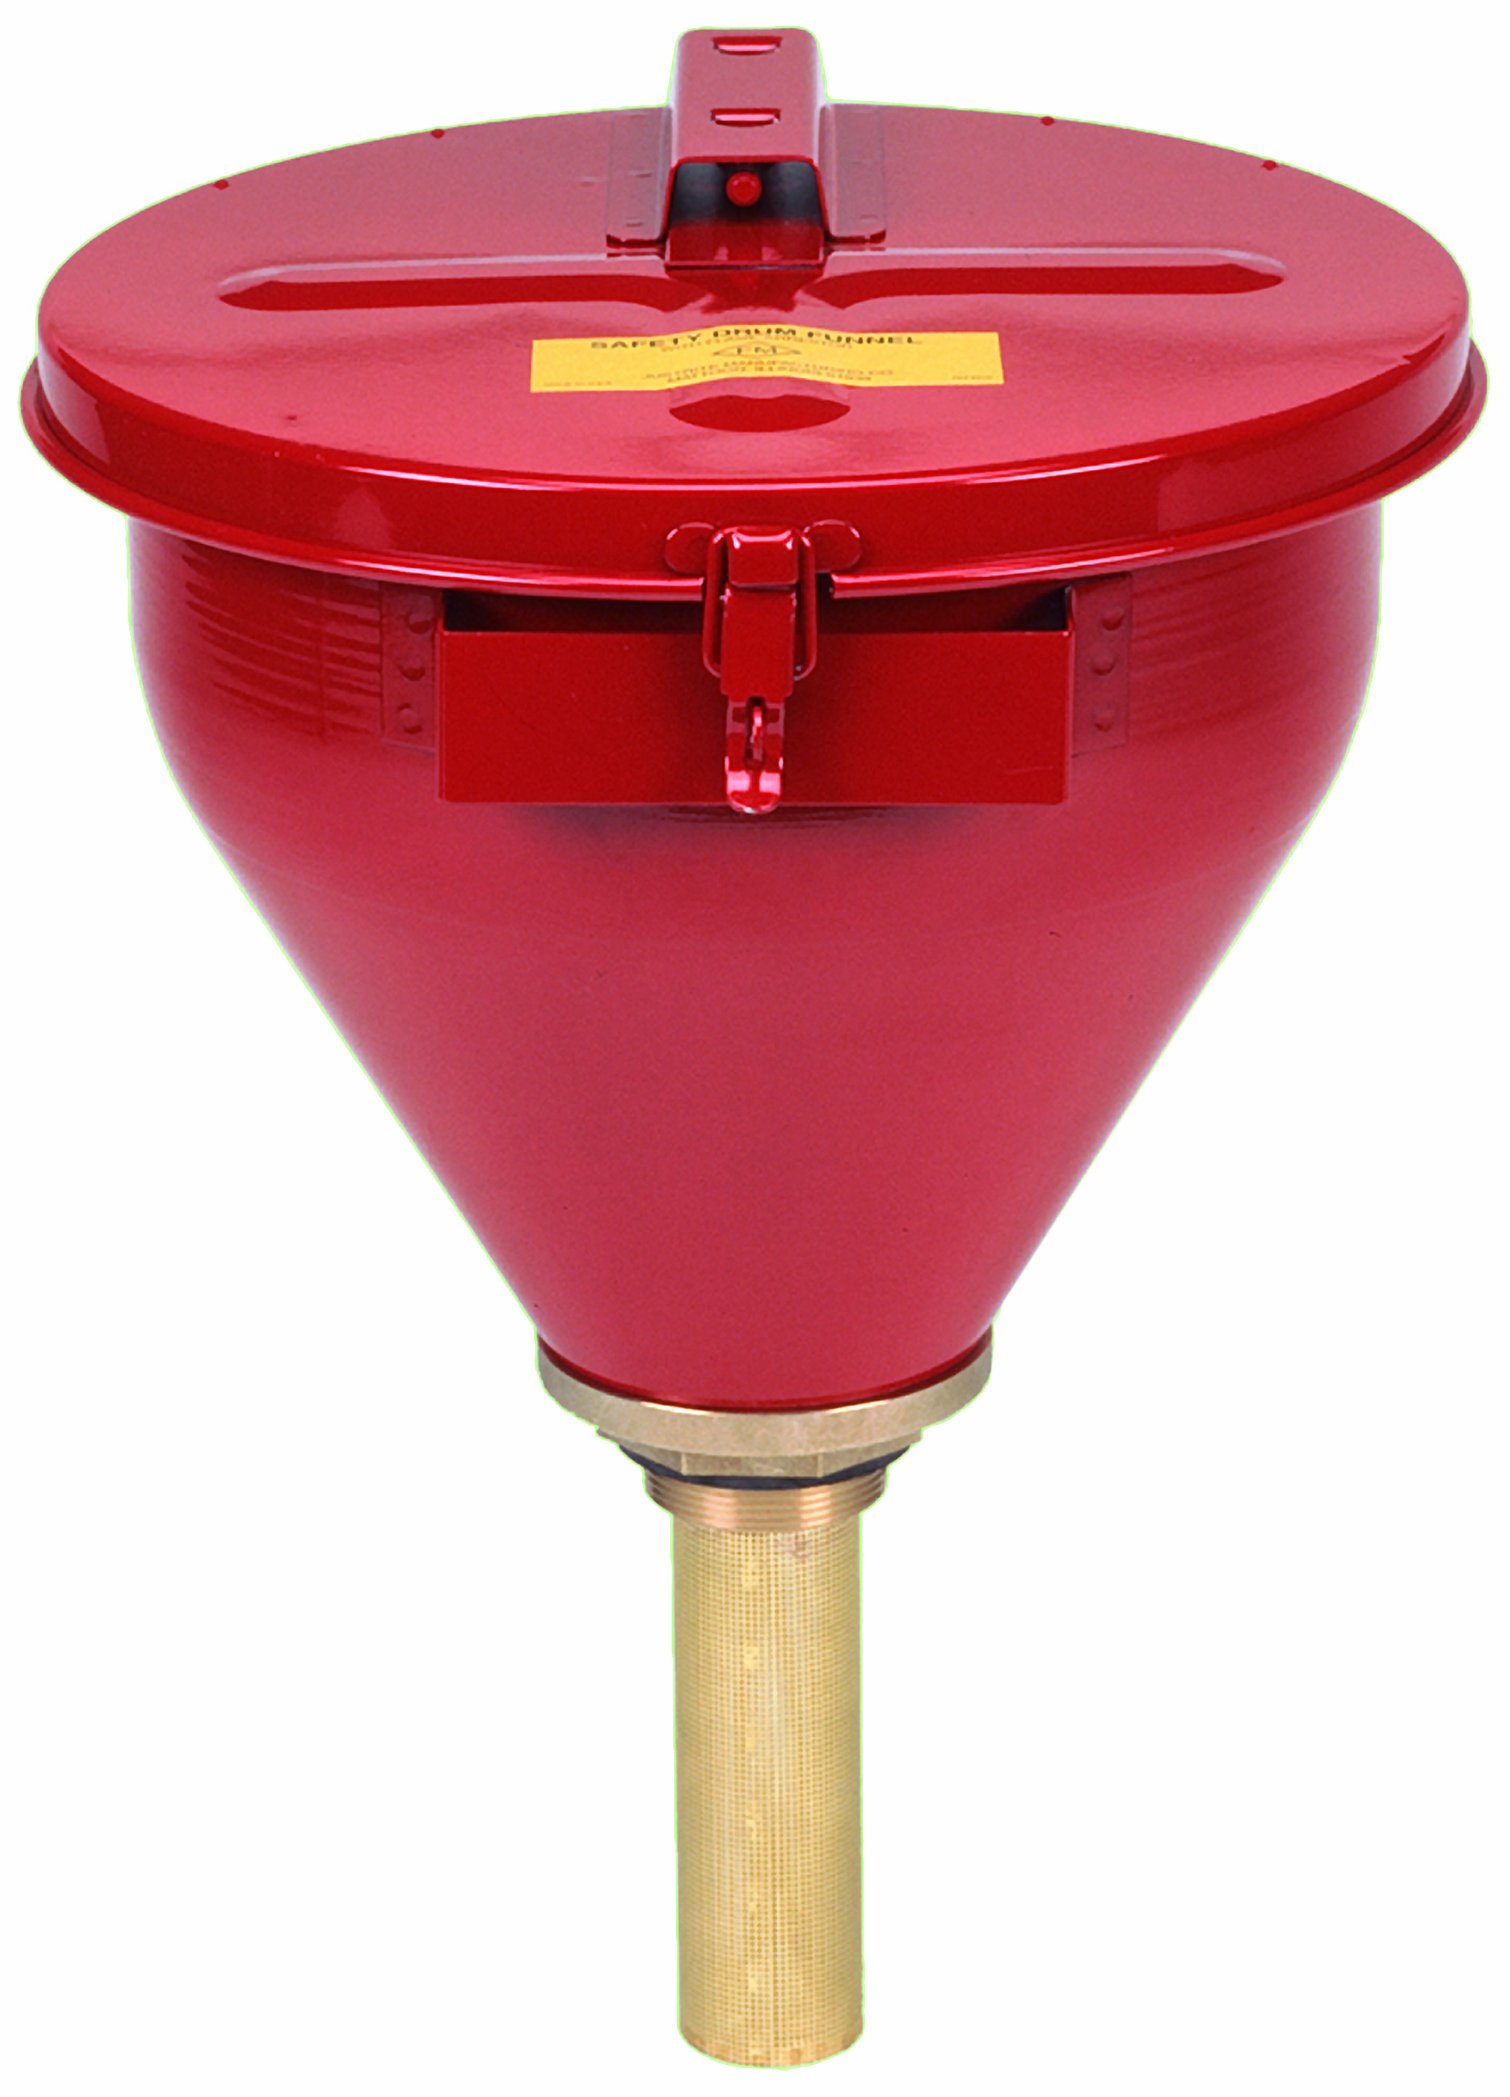 Justrite 2.6 Gallon Red Galvanized Steel Large Safety Drum Funnel with Self-Closing Cover and 6